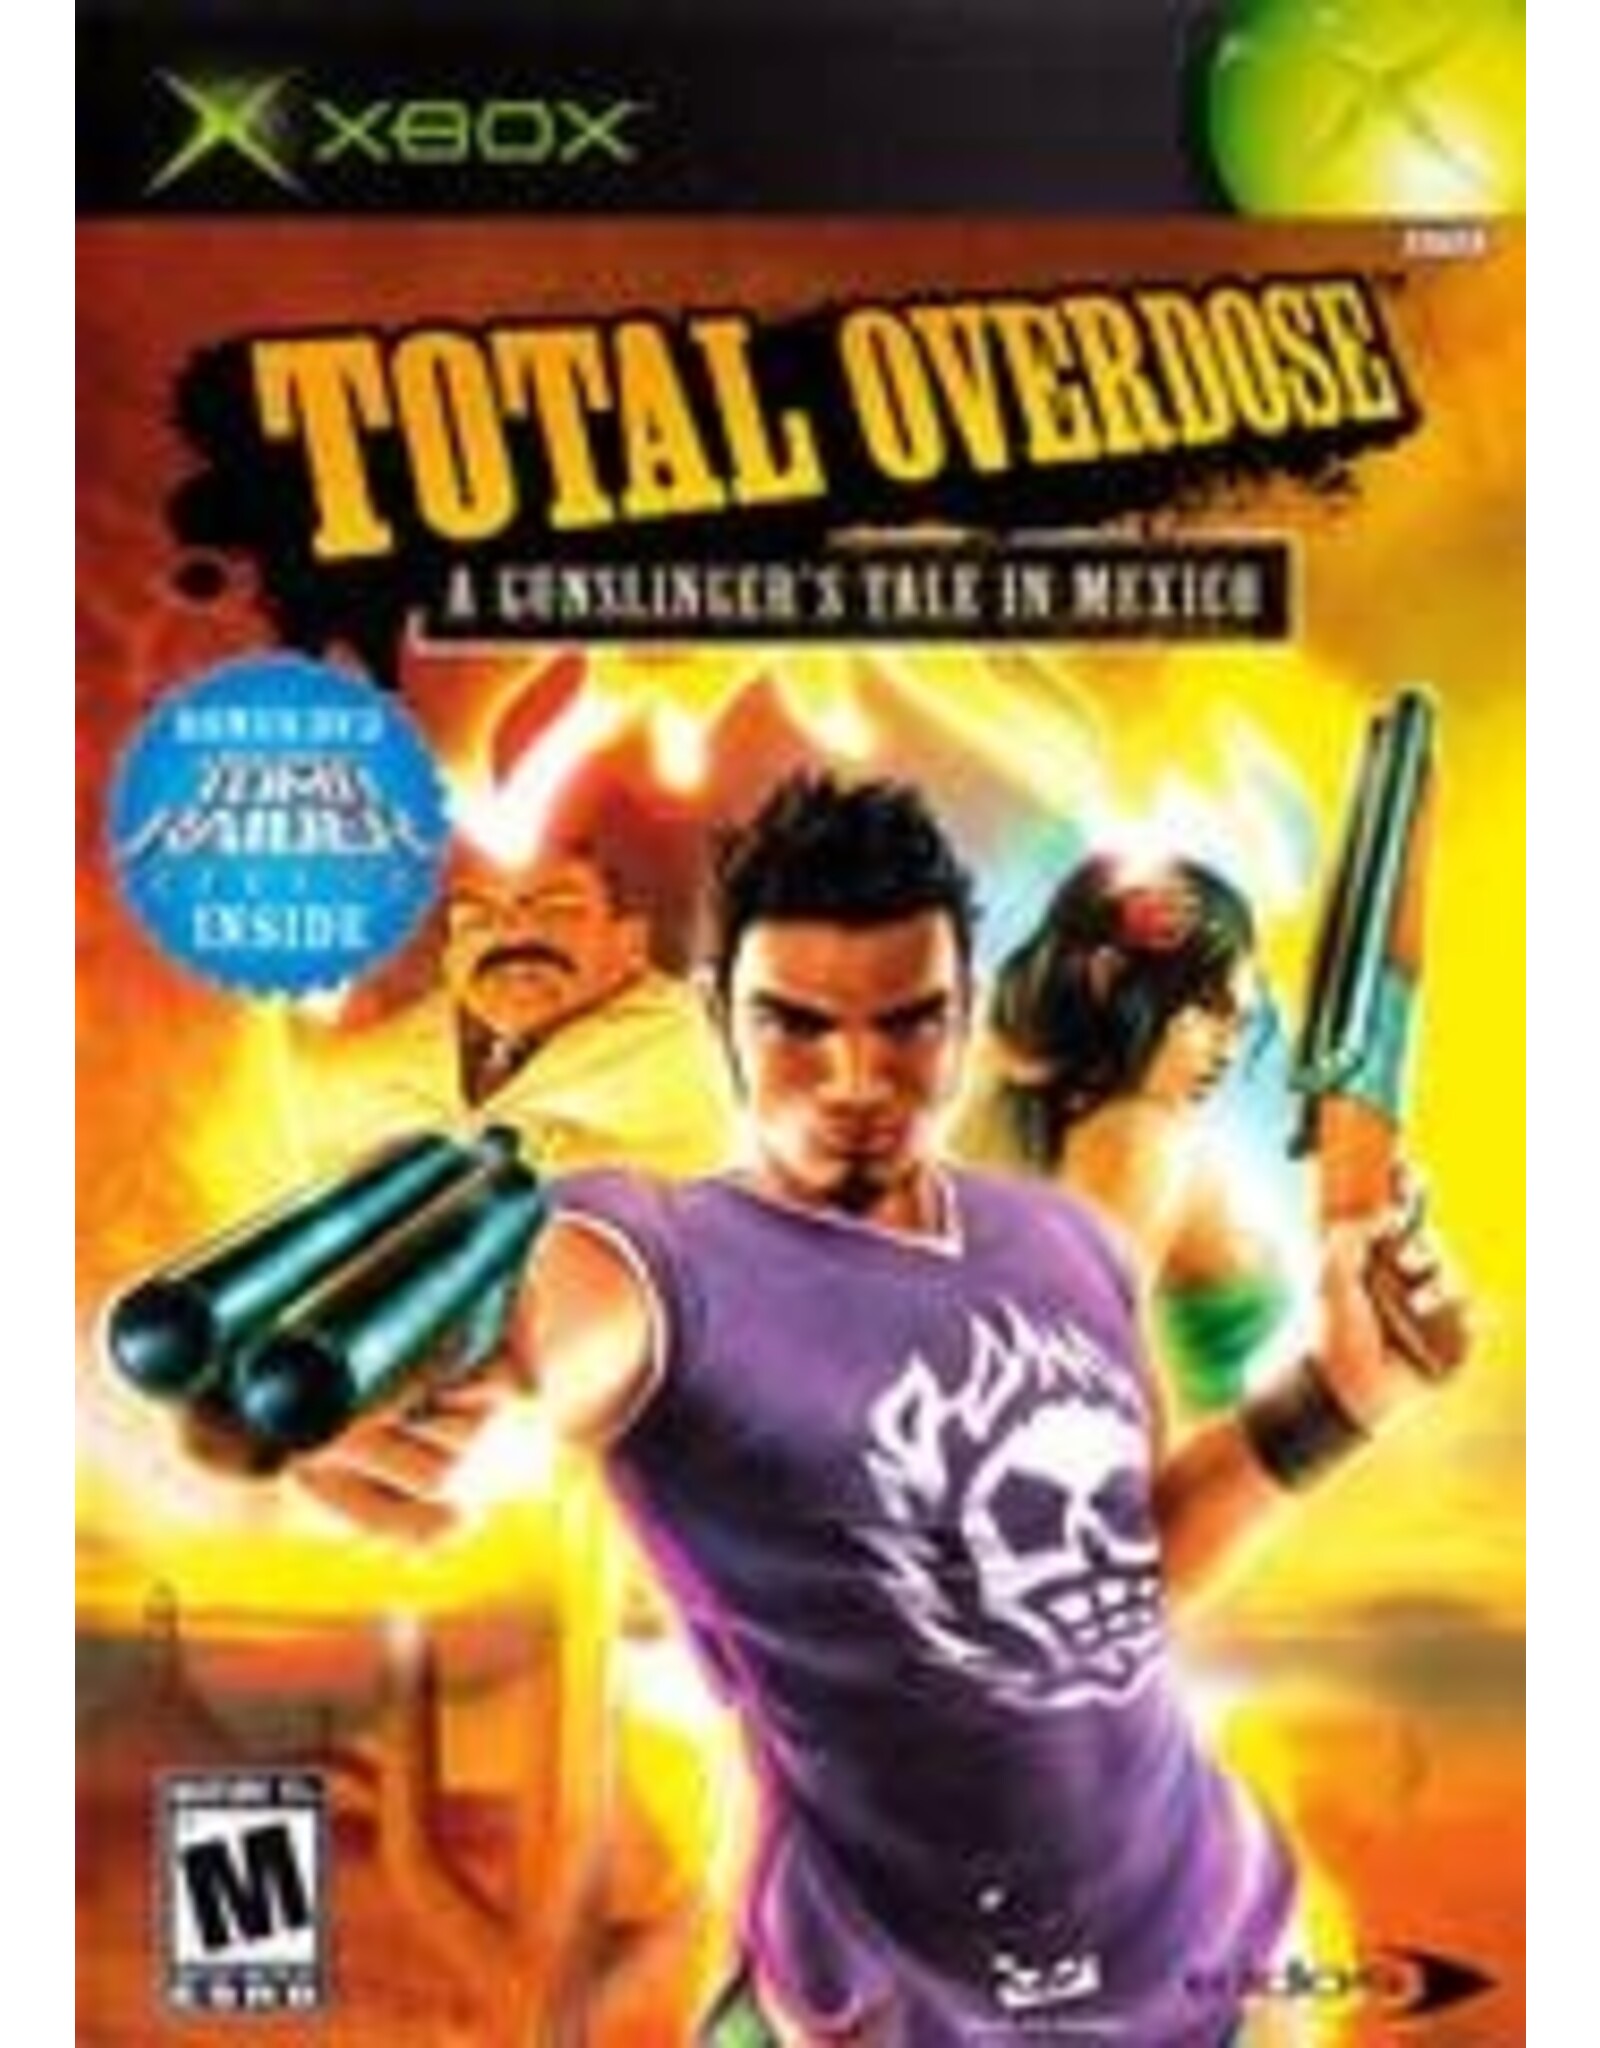 Xbox Total Overdose A Gunslinger's Tale in Mexico (No Manual, Water Damaged Sleeve)